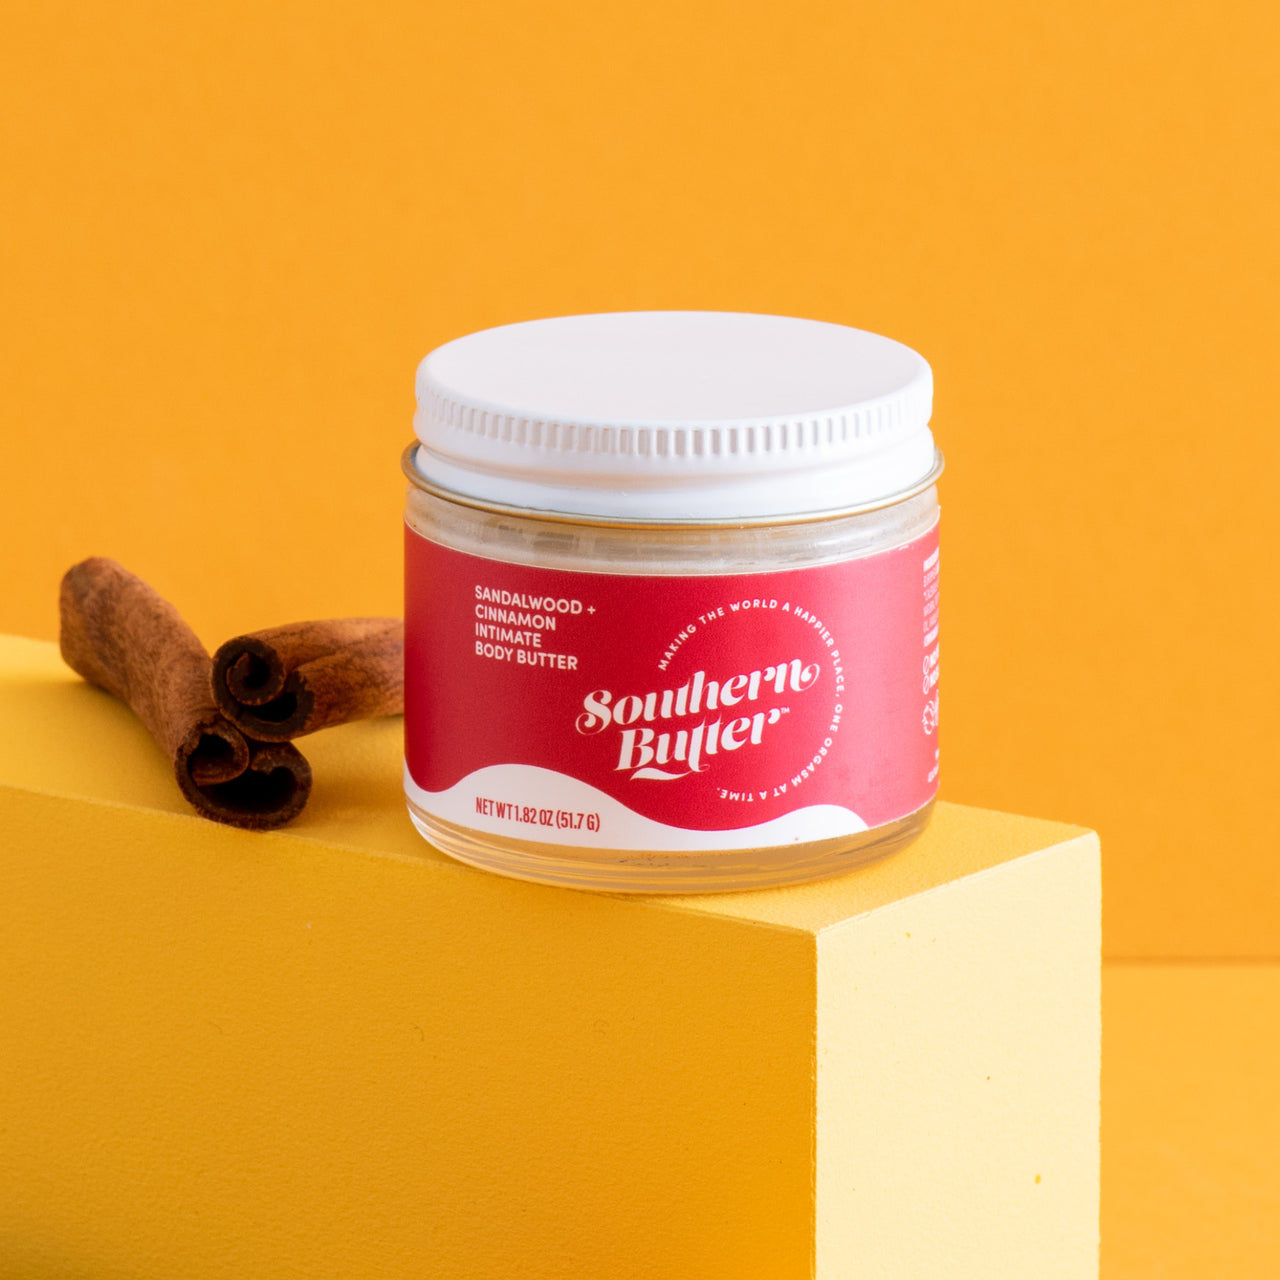 Body Butter - Sandalwood + Cinnamon by Southern Butter